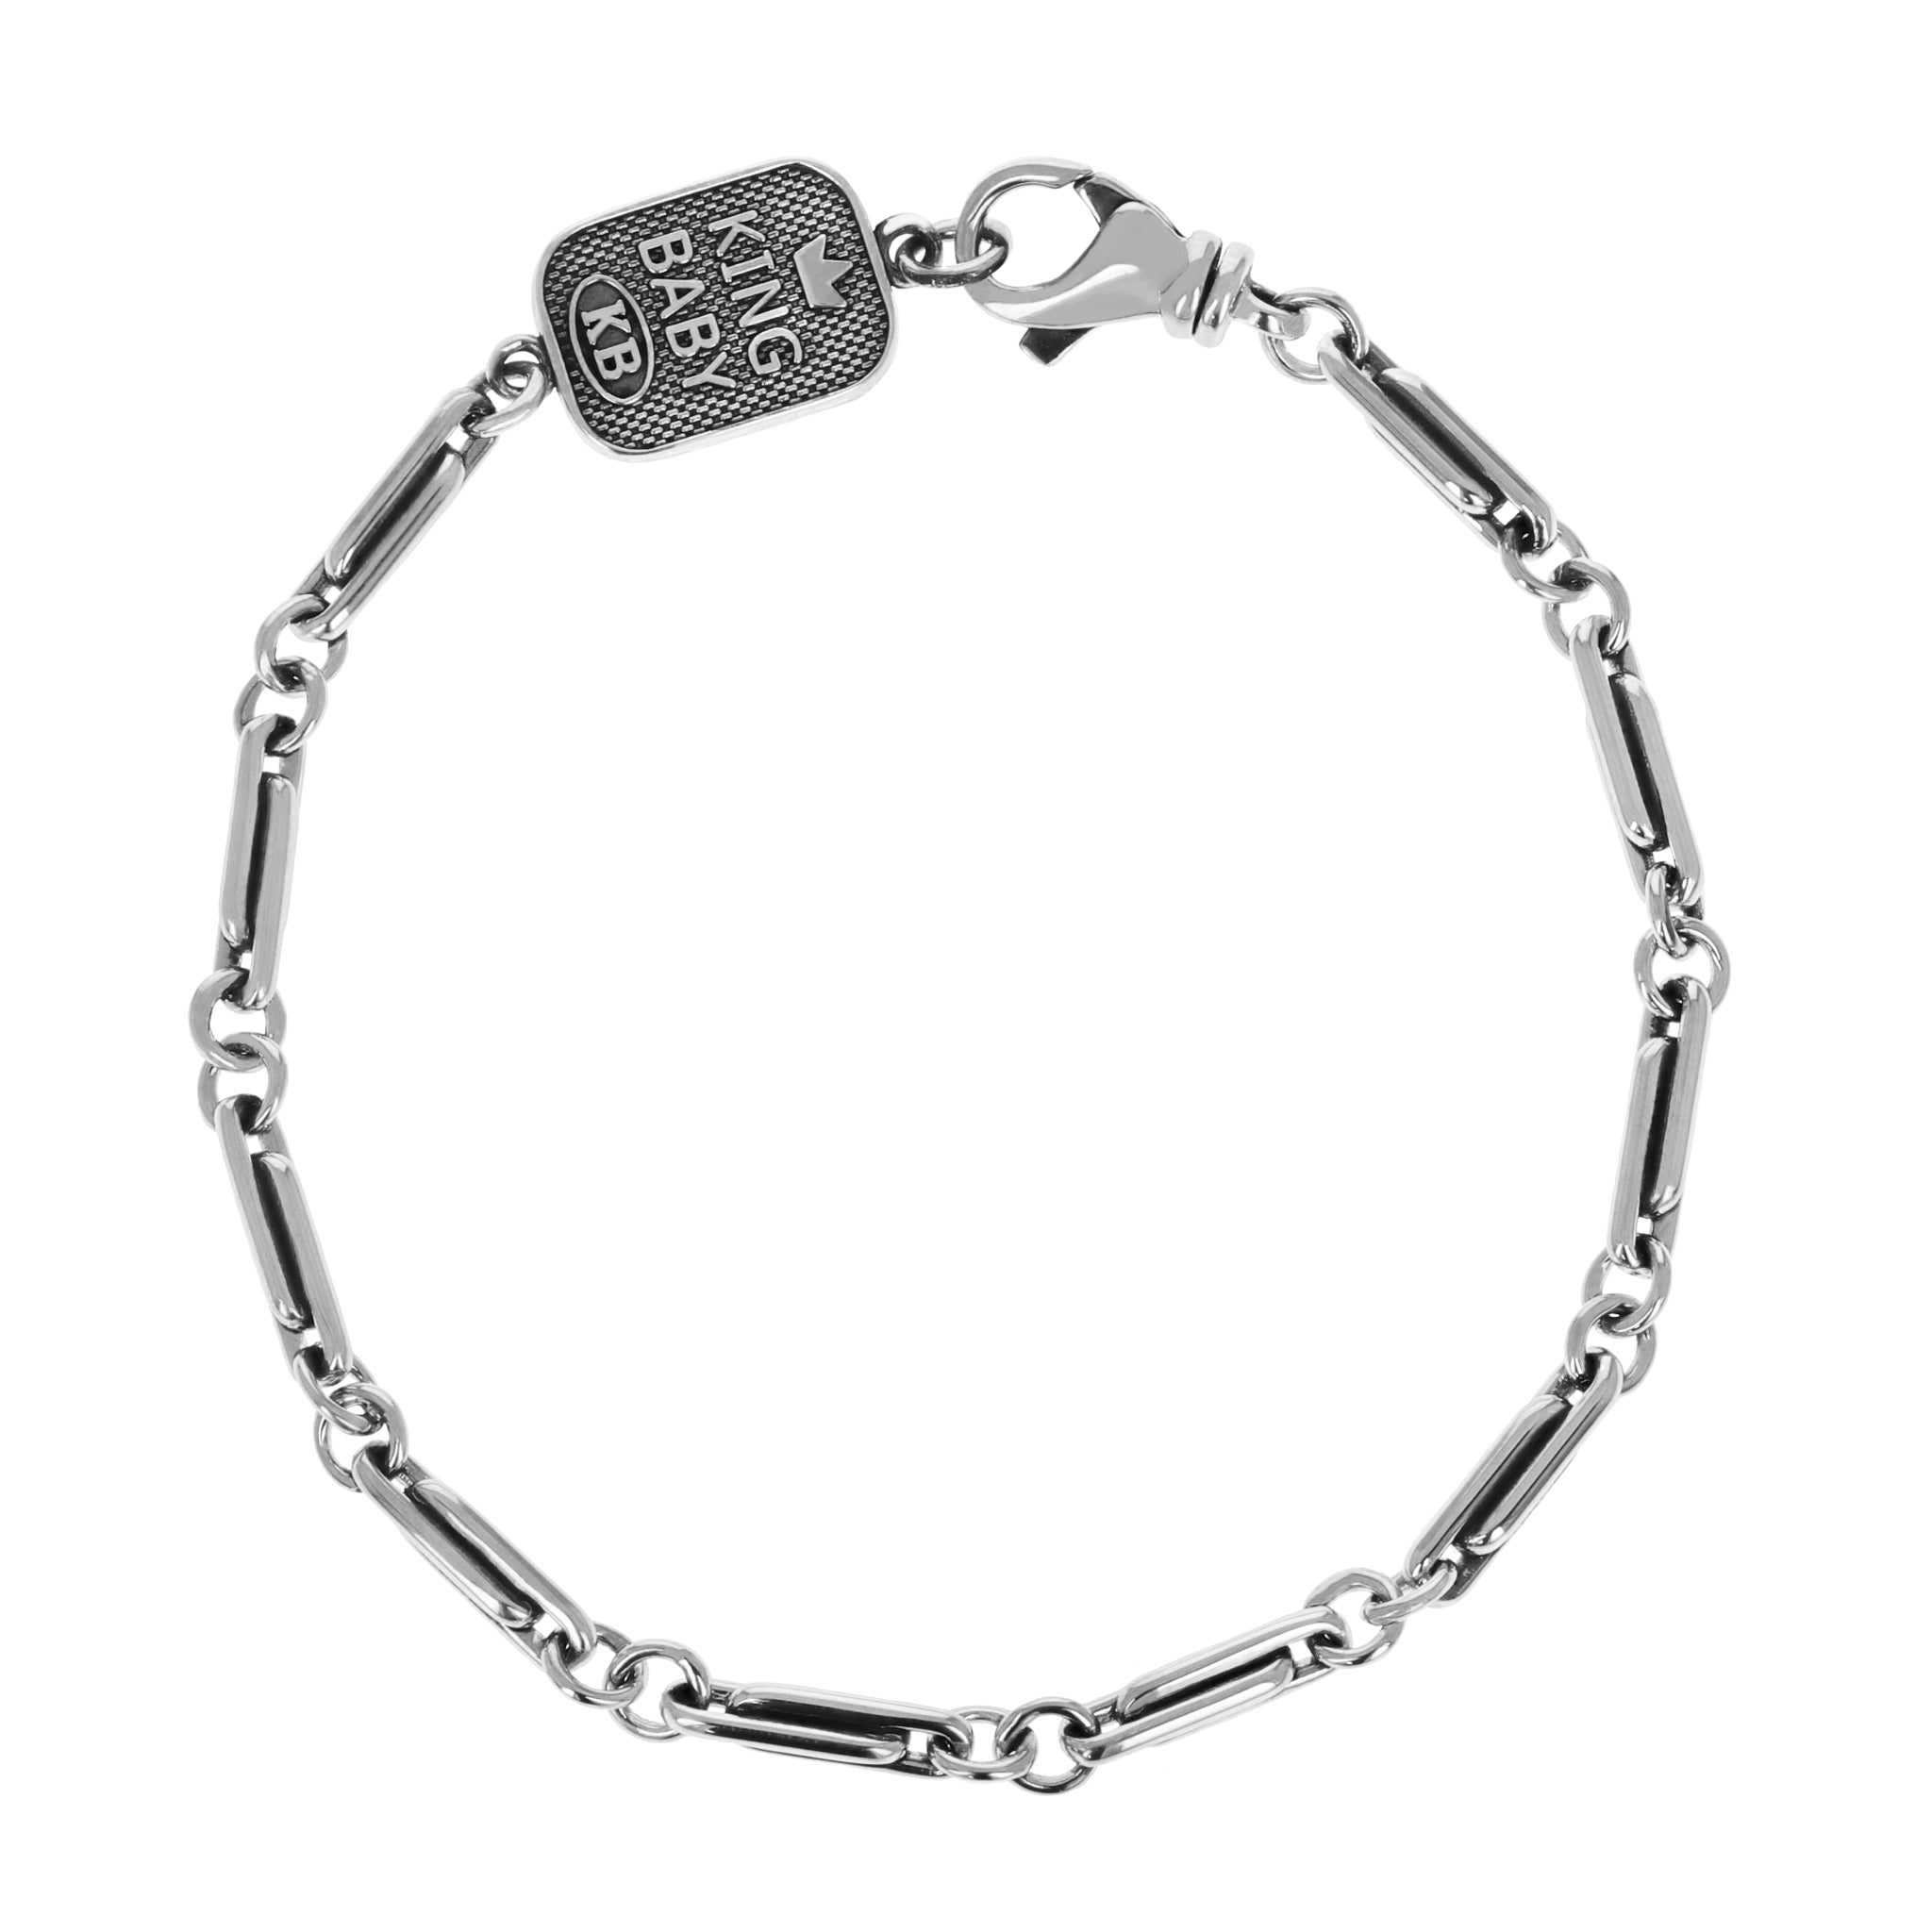 MB CROSS LAVA BEAD Bracelet for Men with Silver from King Baby Studio